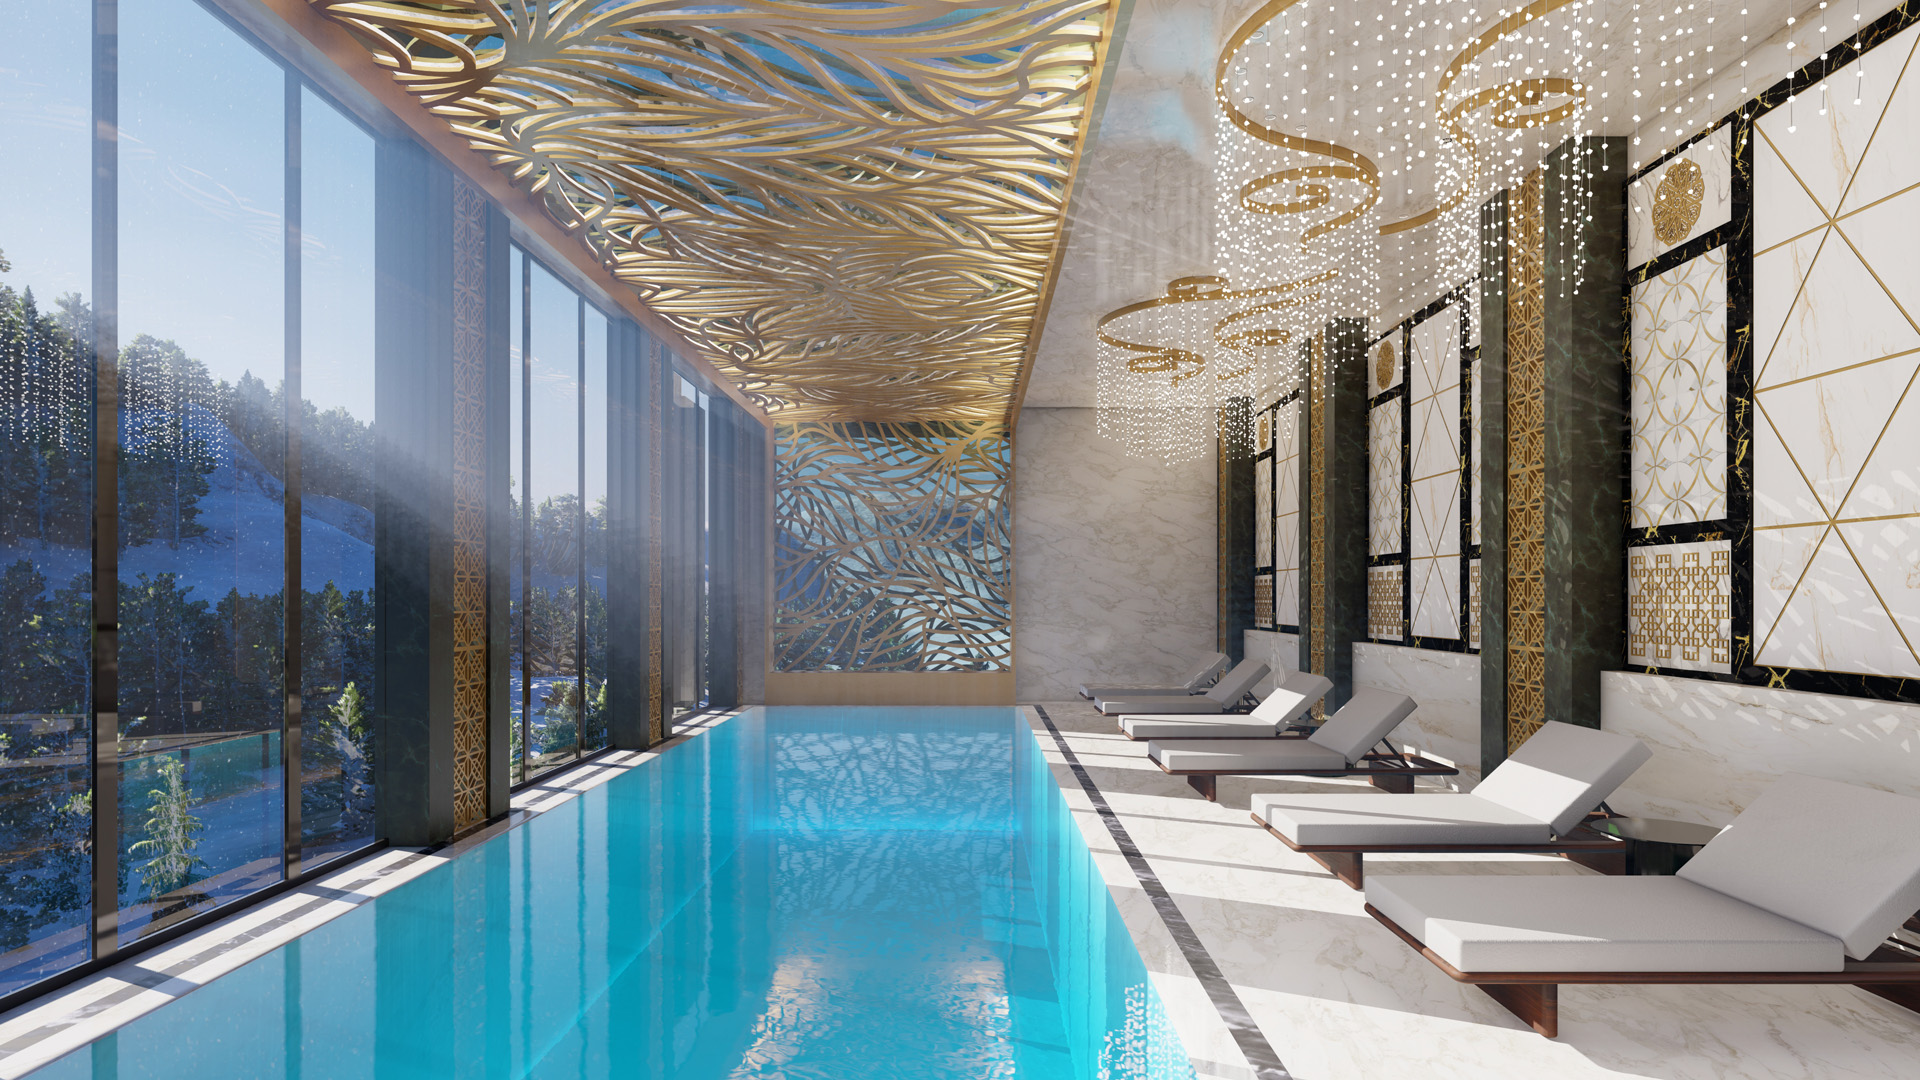 Spa for a luxury resort hotel